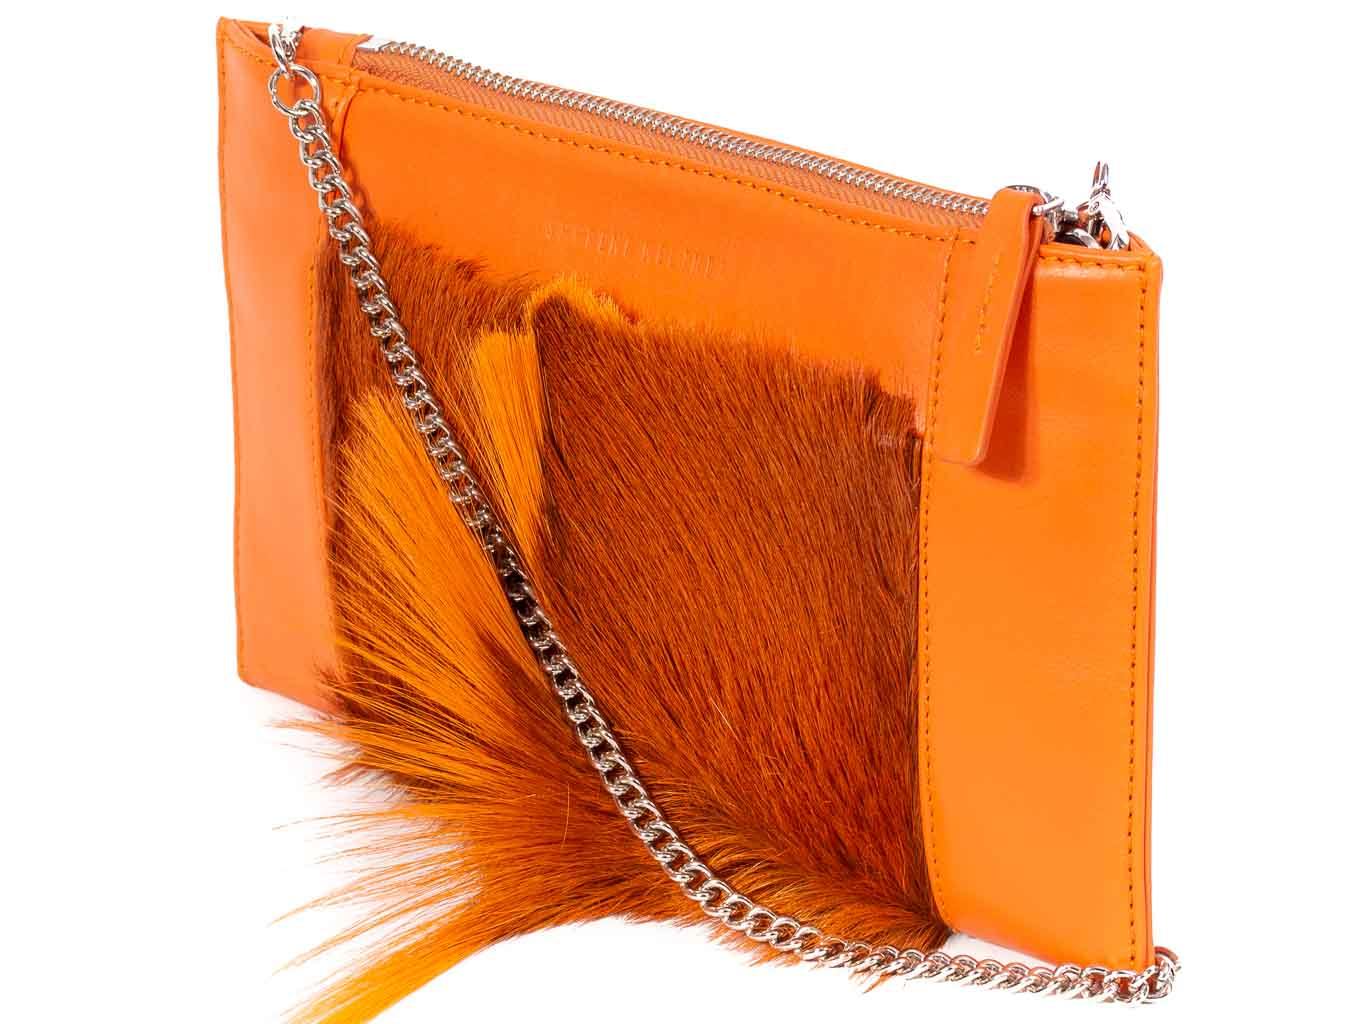 Clutch Springbok Handbag in Orange with a fan feature by Sherene Melinda front strap